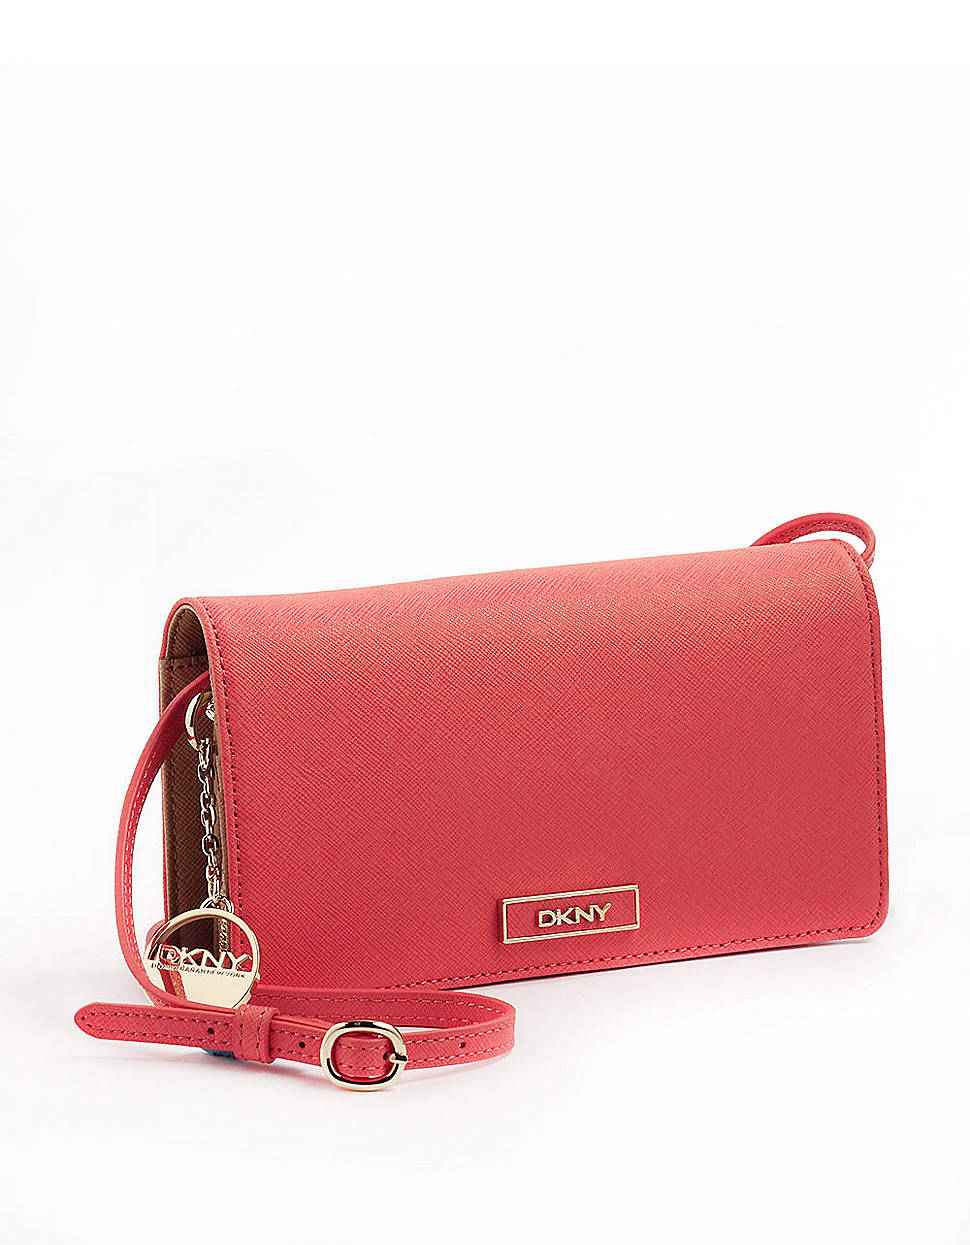 Dkny Saffiano Leather Convertible Crossbody Clutch Bag in Pink (CORAL) | Lyst